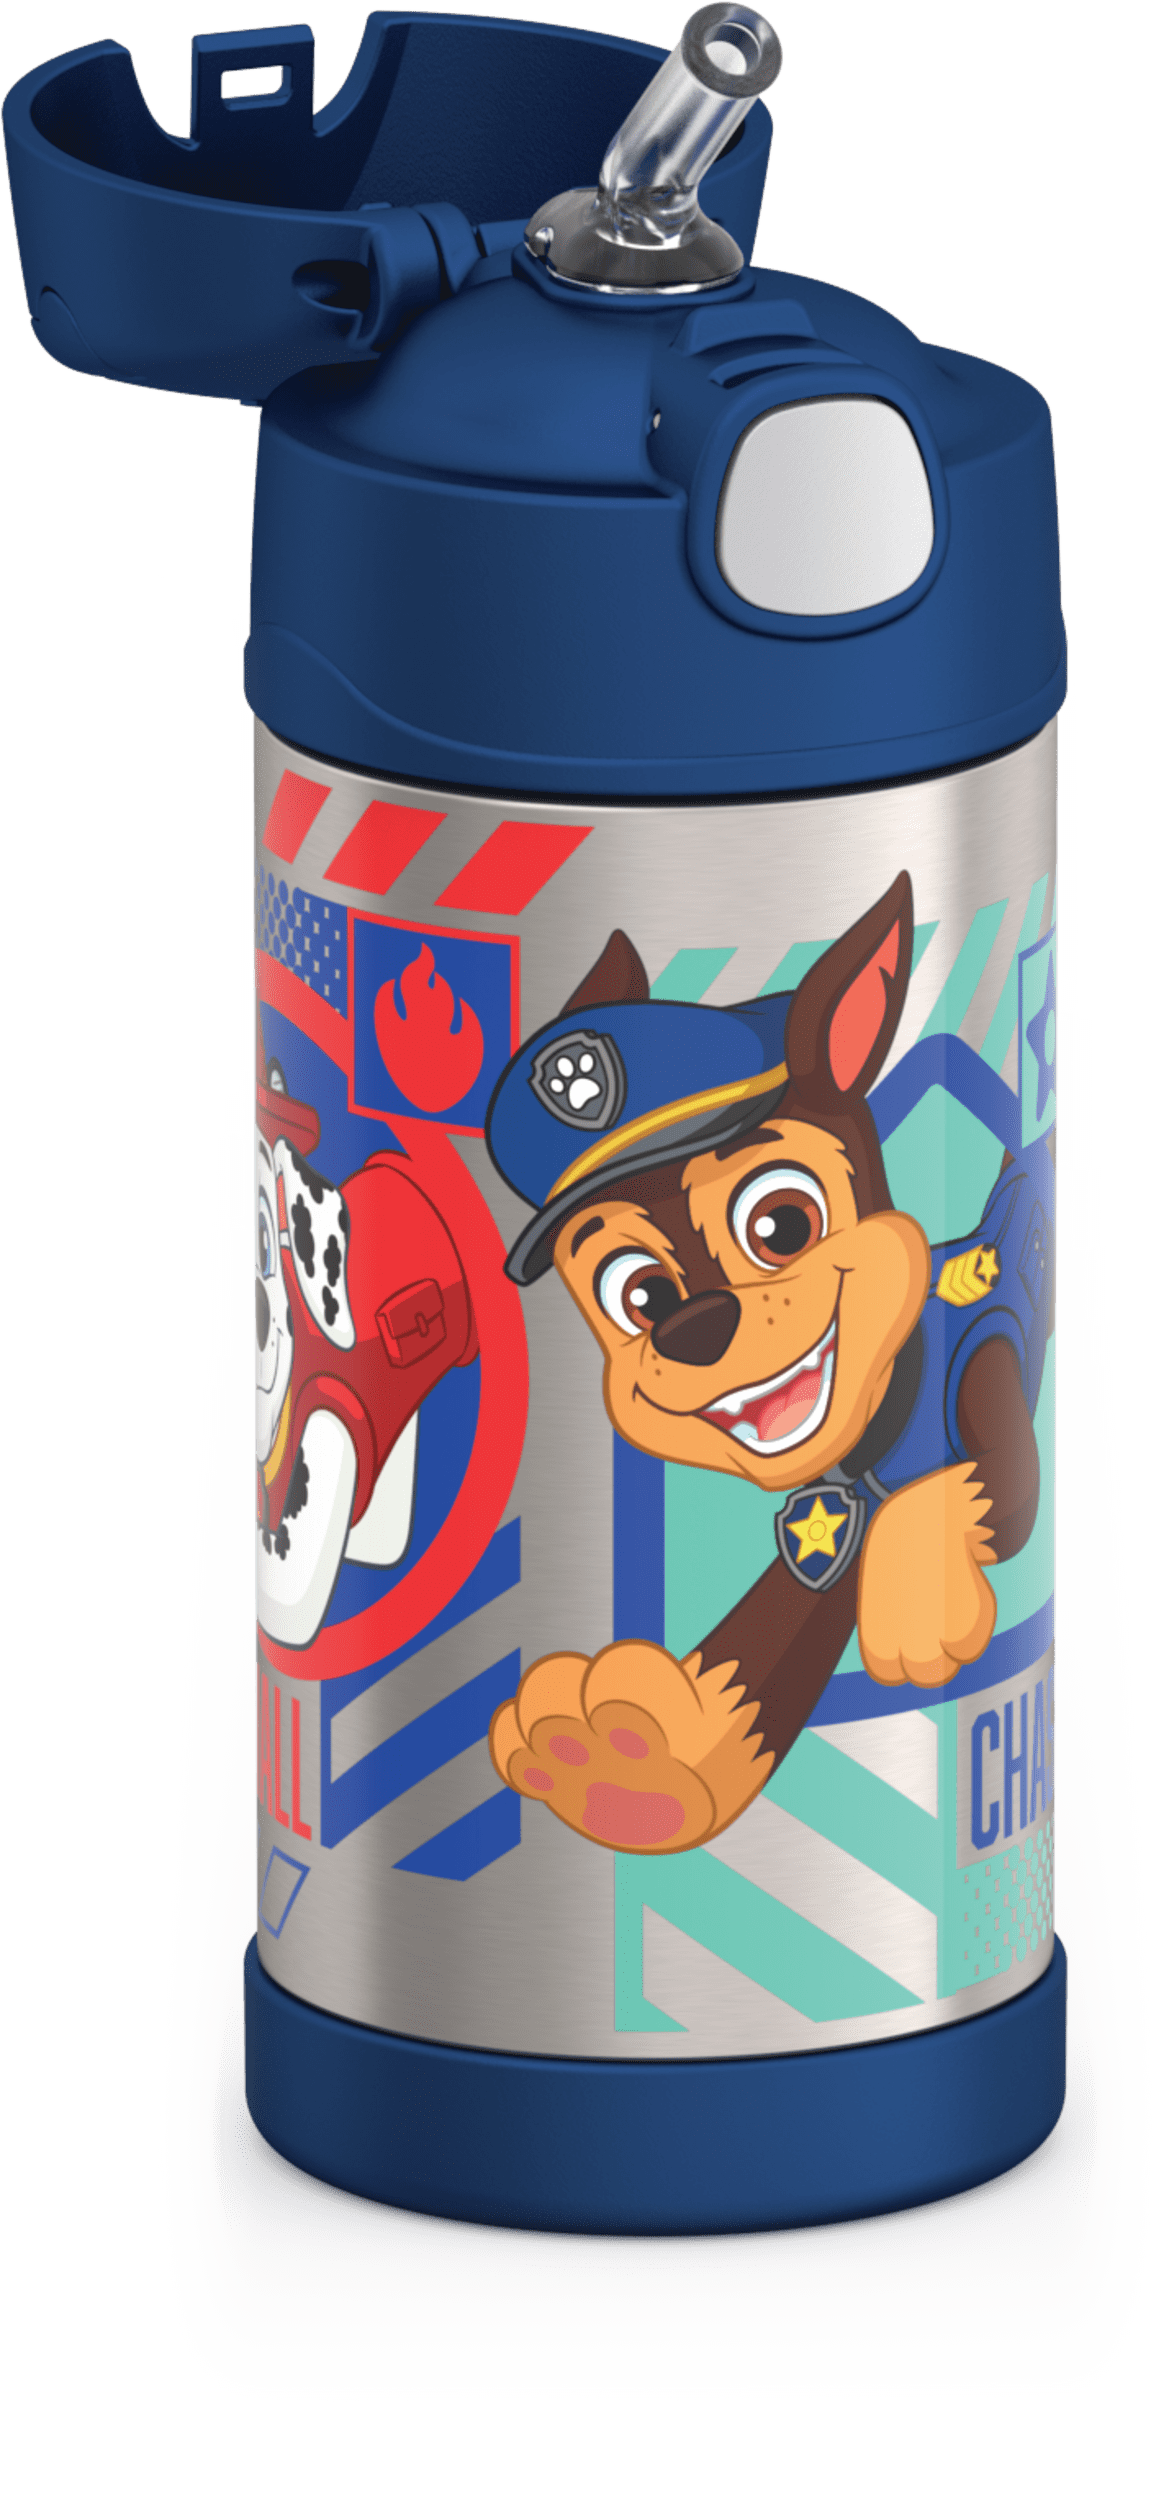 Thermos FUNtainer Stainless Steel 12oz/355mL Straw Bottle - Pokemon – Han  Star Co.